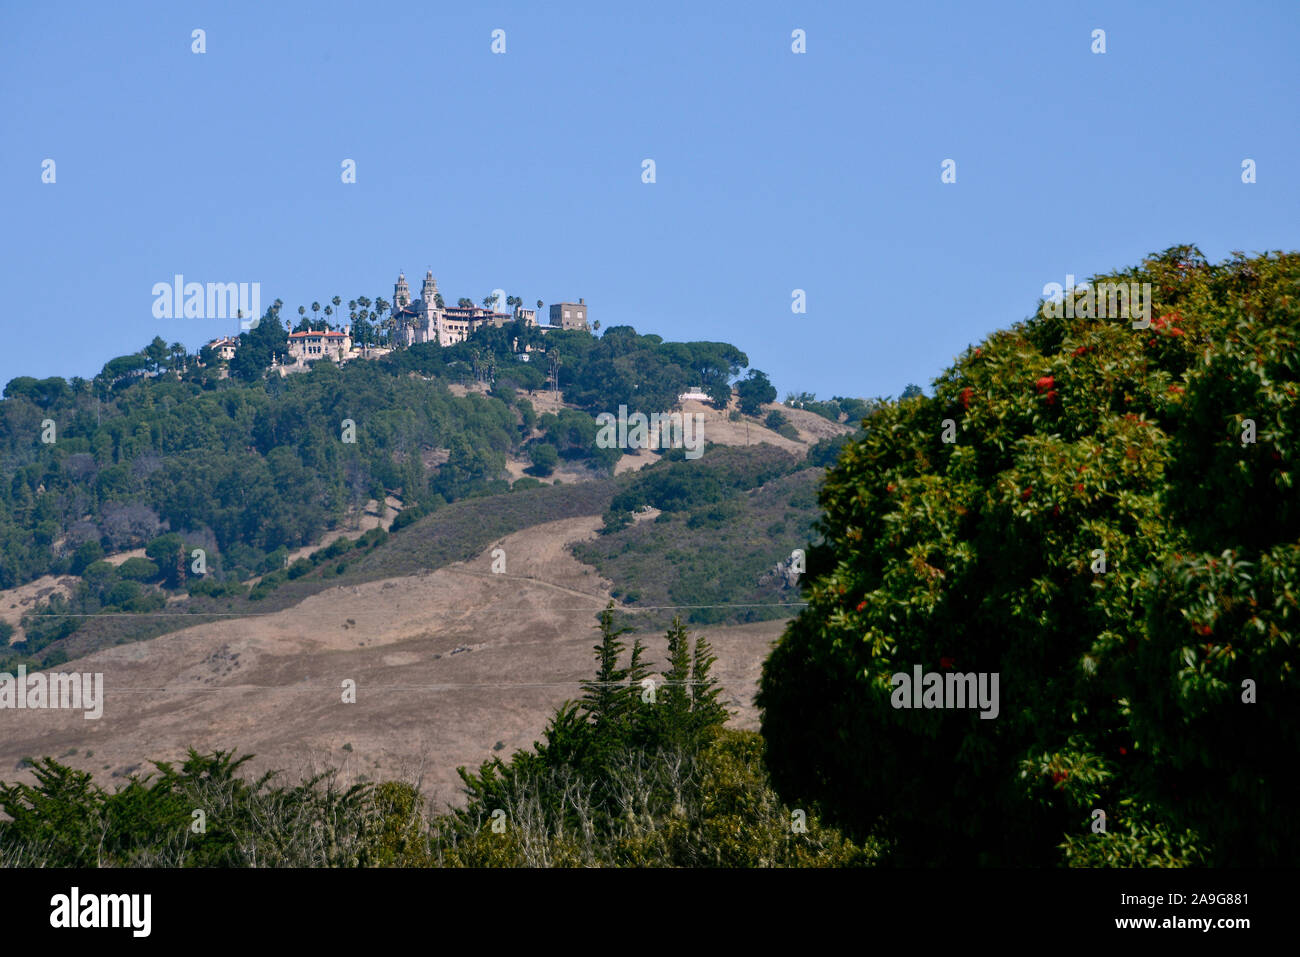 The castle-like Hearst Castle estate on a hilltop on Highway 1, California, USA Stock Photo